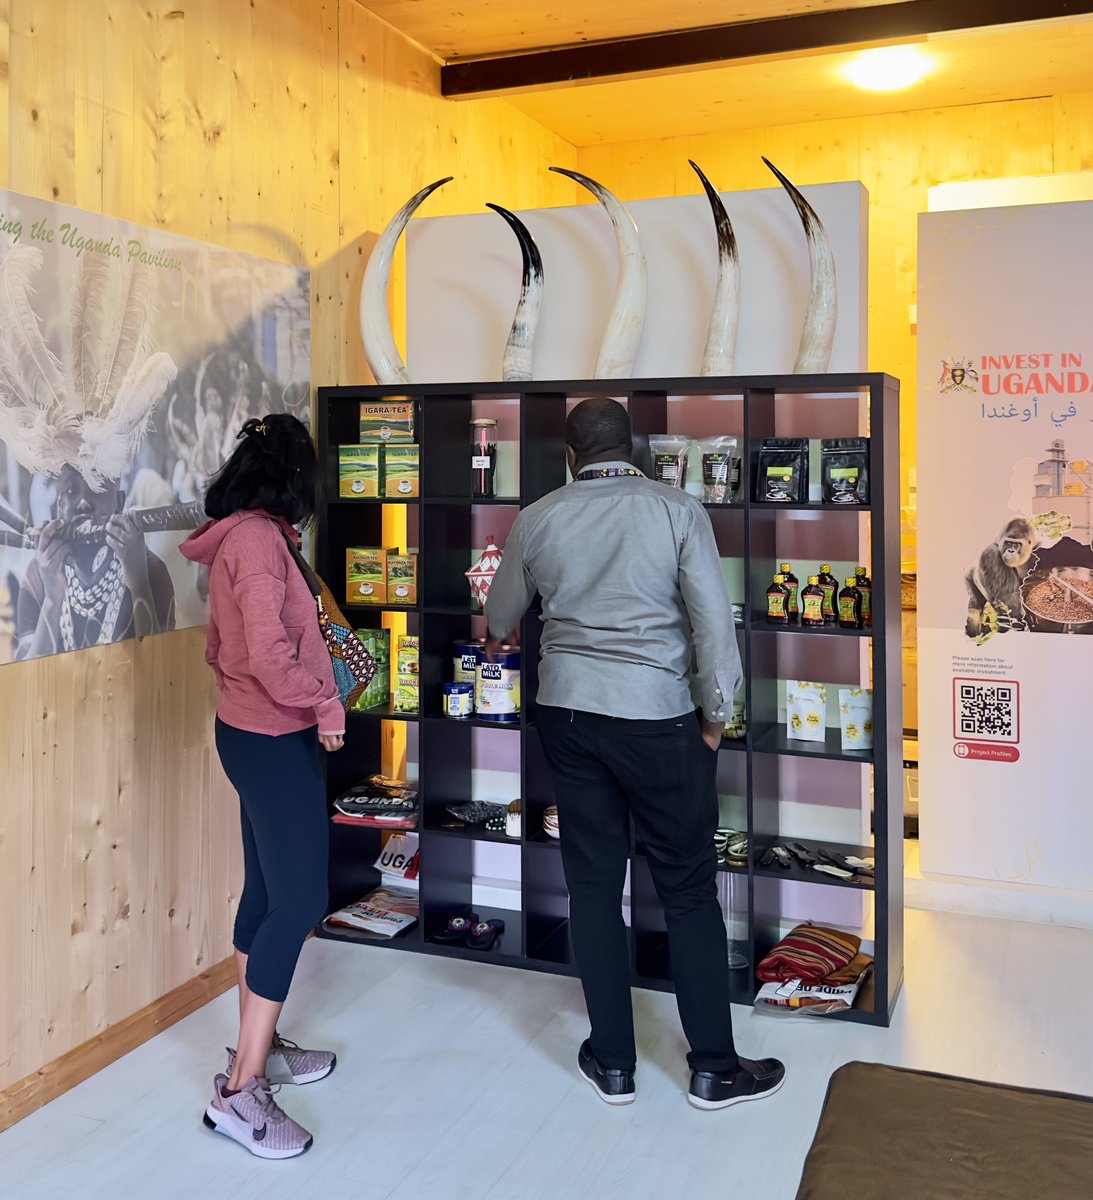 Join us in celebrating the beauty and resilience of Uganda as we make these final days memorable, with vibrant colors adorning our exhibits and smiles on the faces of our guests, showcasing the power of connection.
Plot 27, Al Bidda Park @Expo2023Doha 
#UgandaExploration